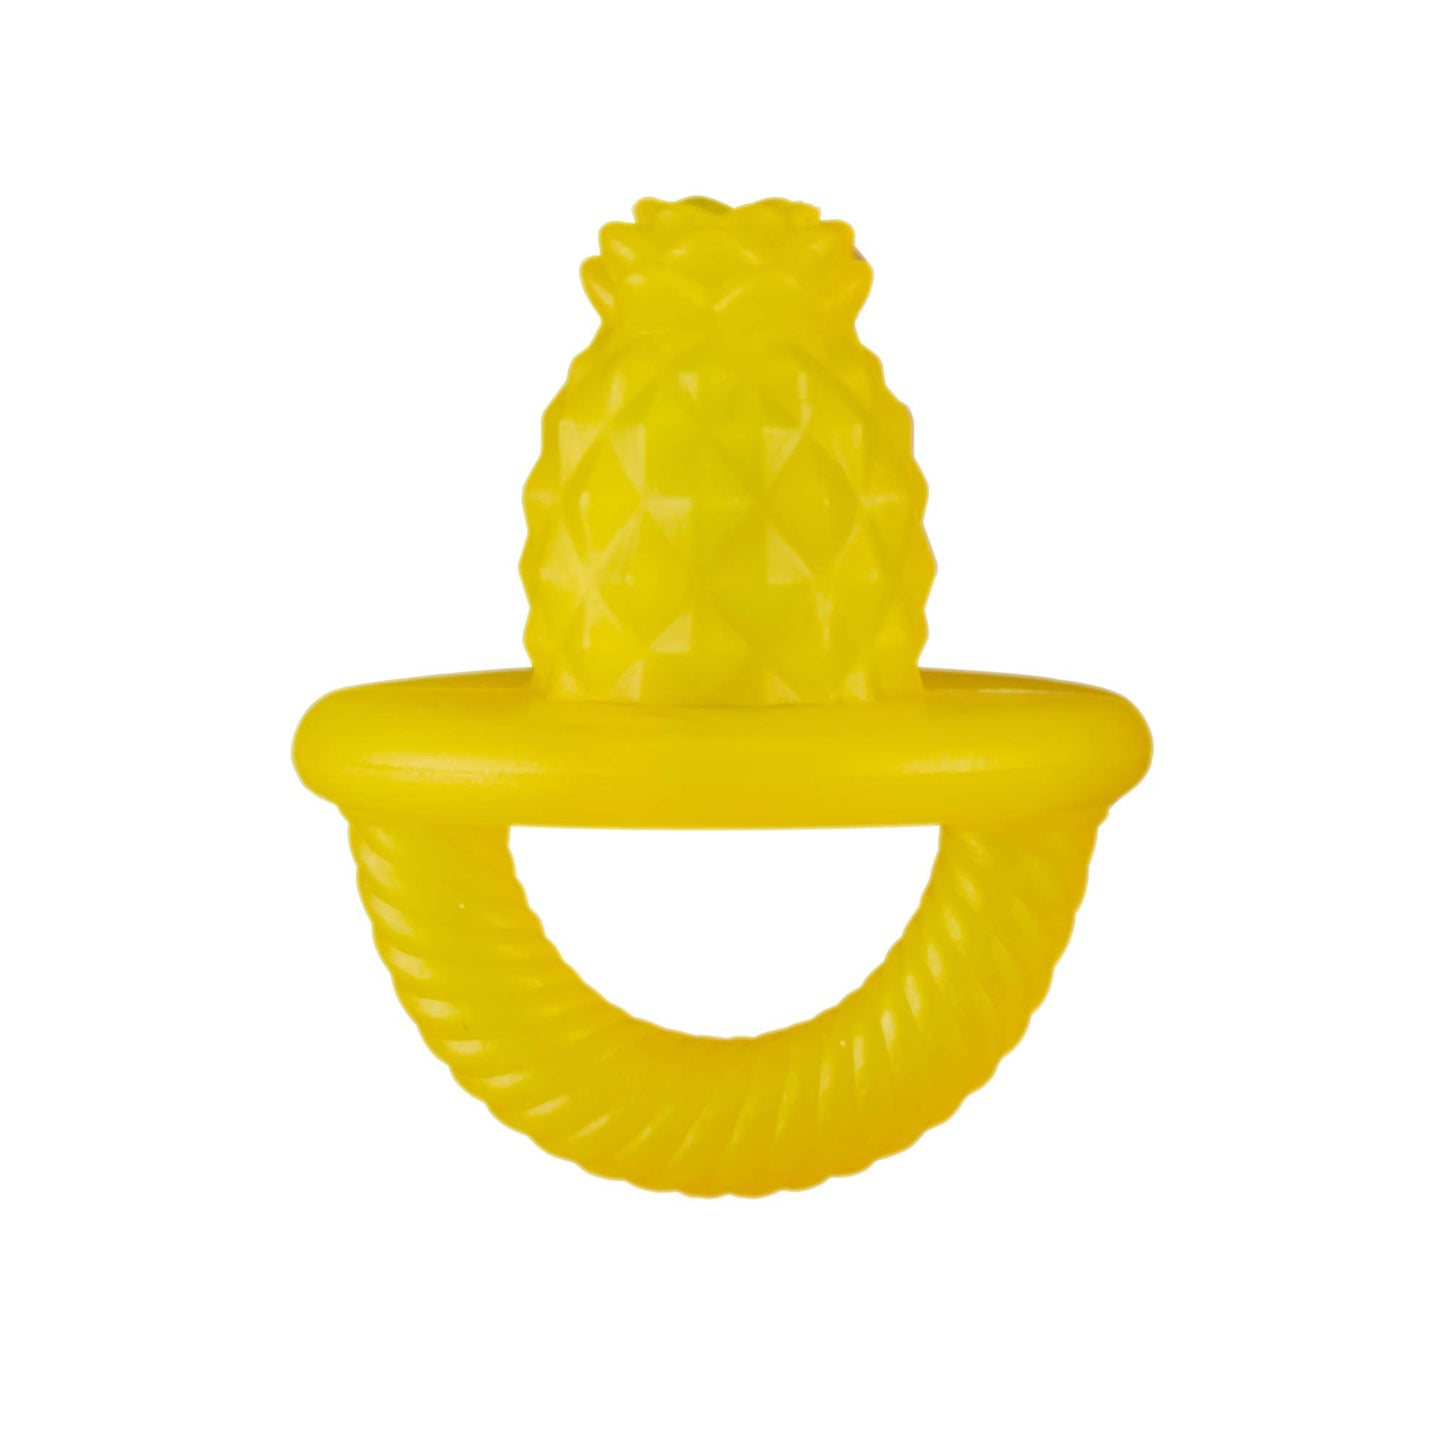 Teensy Teether Soothing Silicone Teether - Pineapple, Itzy Ritzy, eco-friendly Toys, Mountain Kids Toys